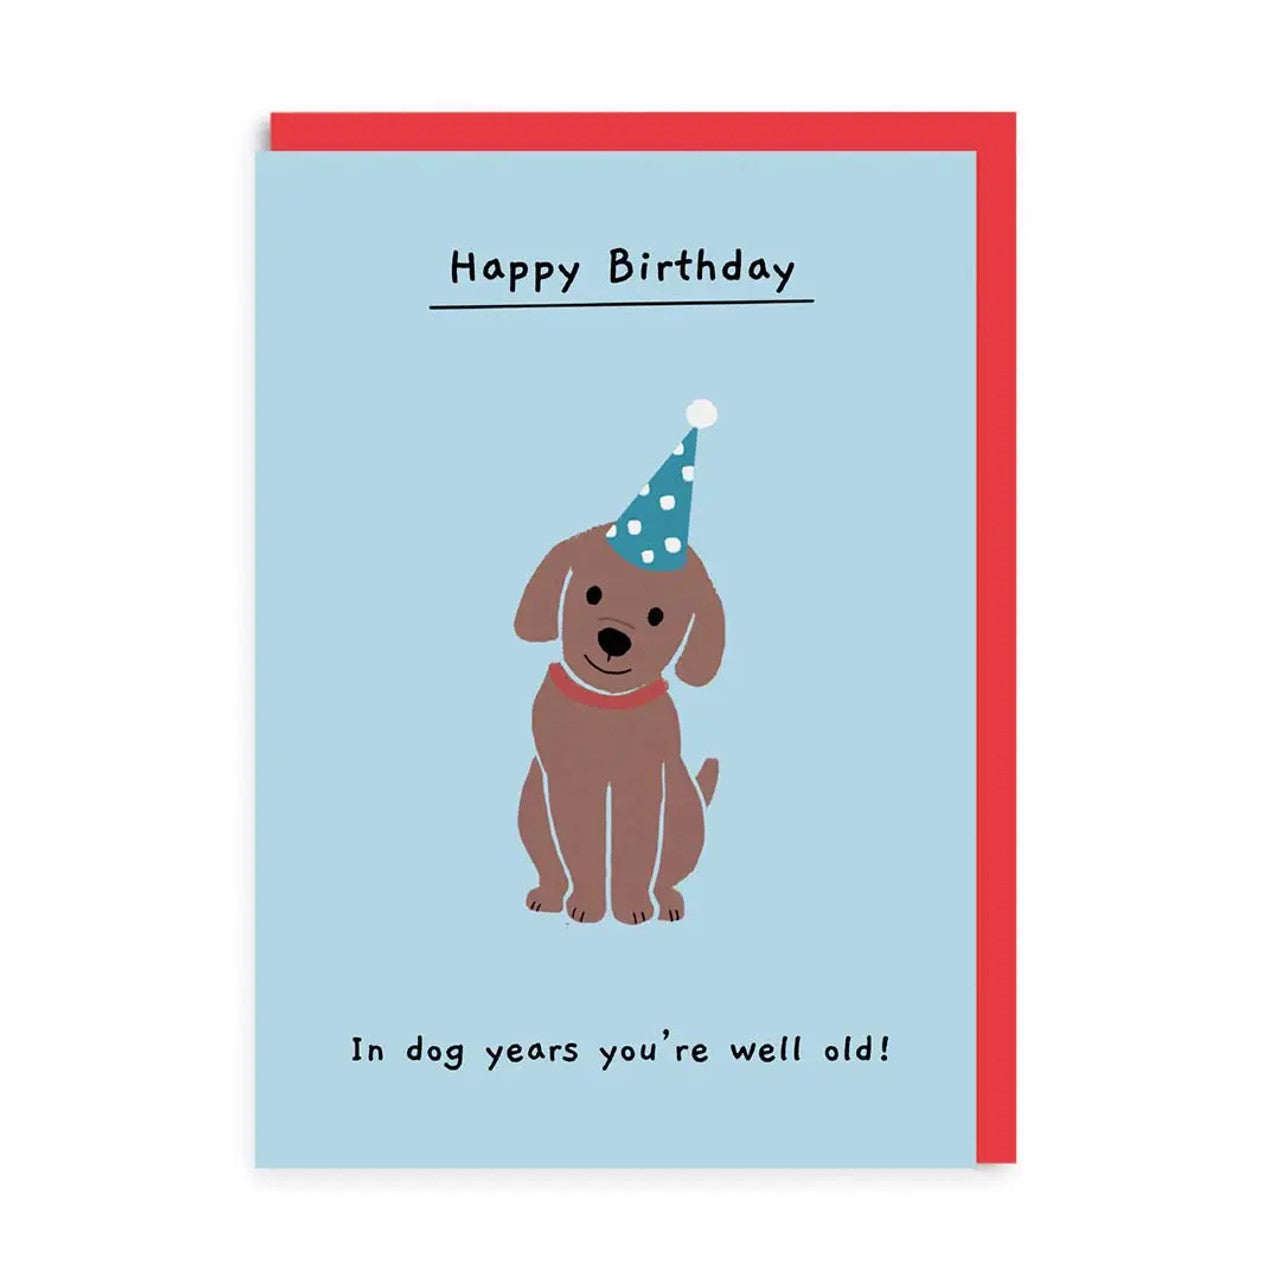 Birthday Card text reads "Happy Birthday In dog years you're well old"